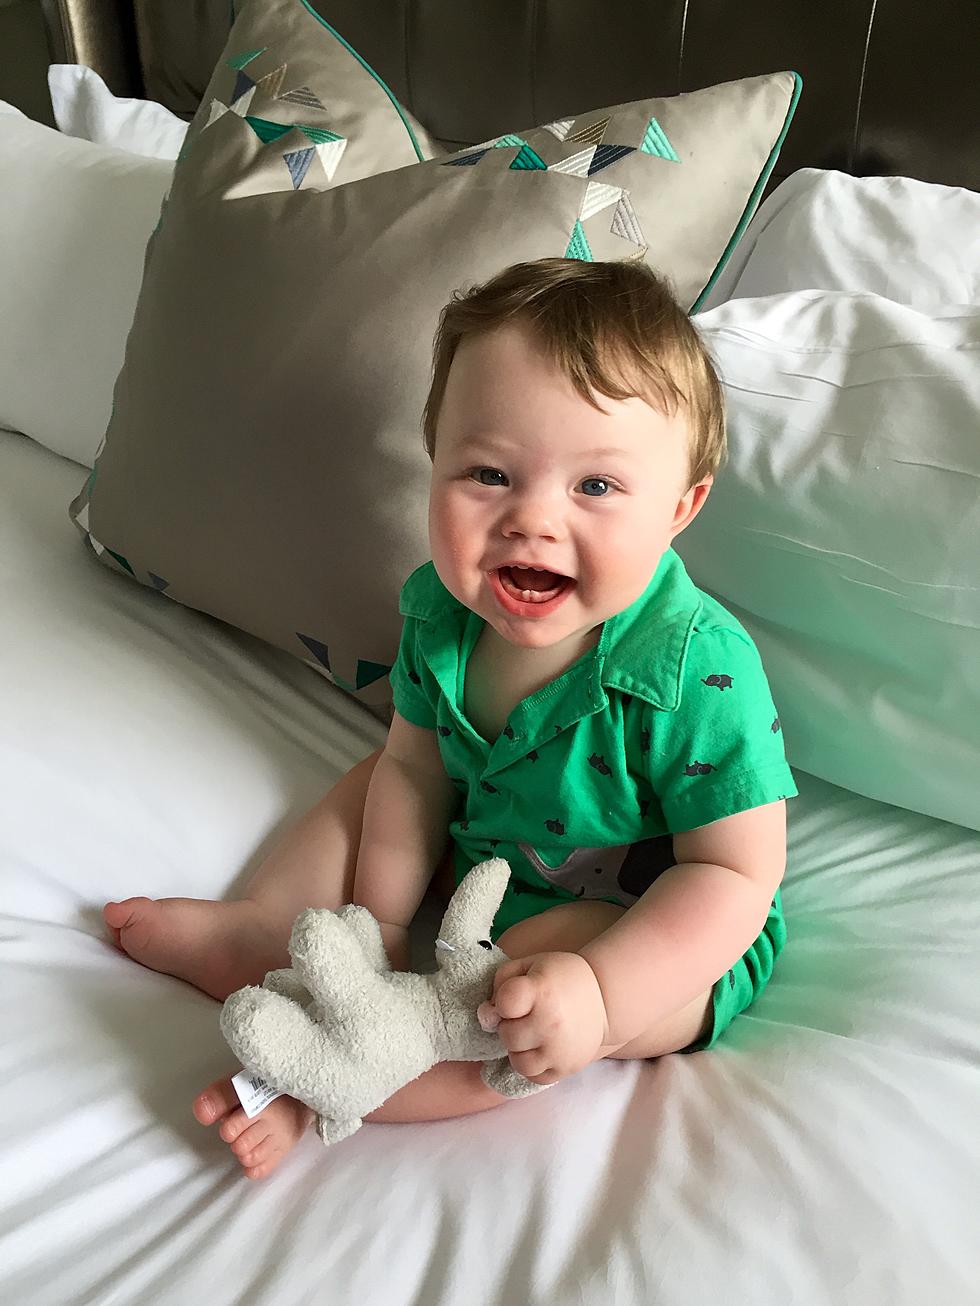 A NJ baby takes his first trip to Philly and his reaction is priceless